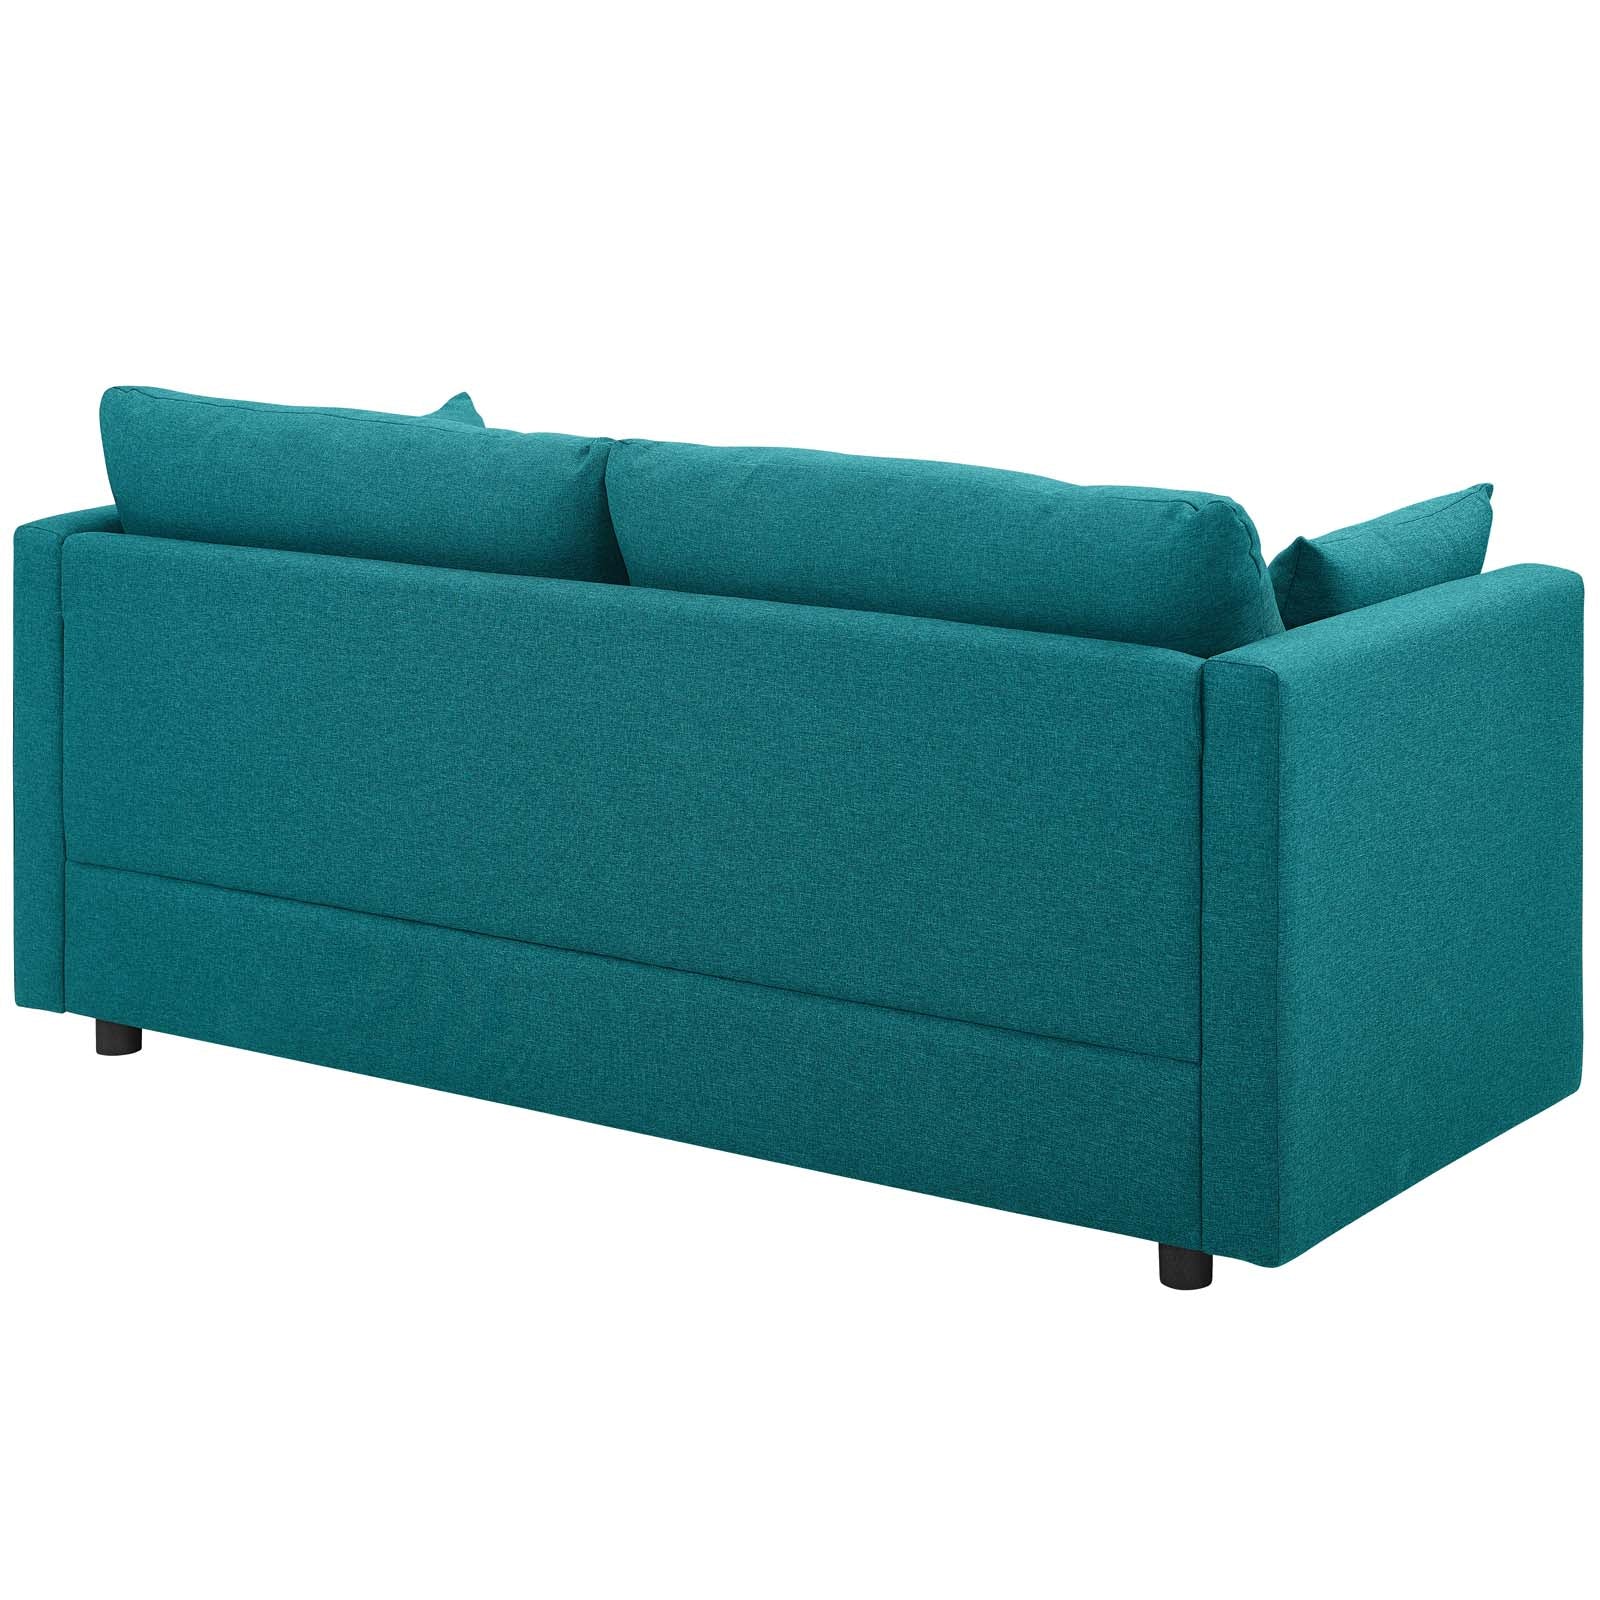 Activate 3 Piece Upholstered Fabric Set